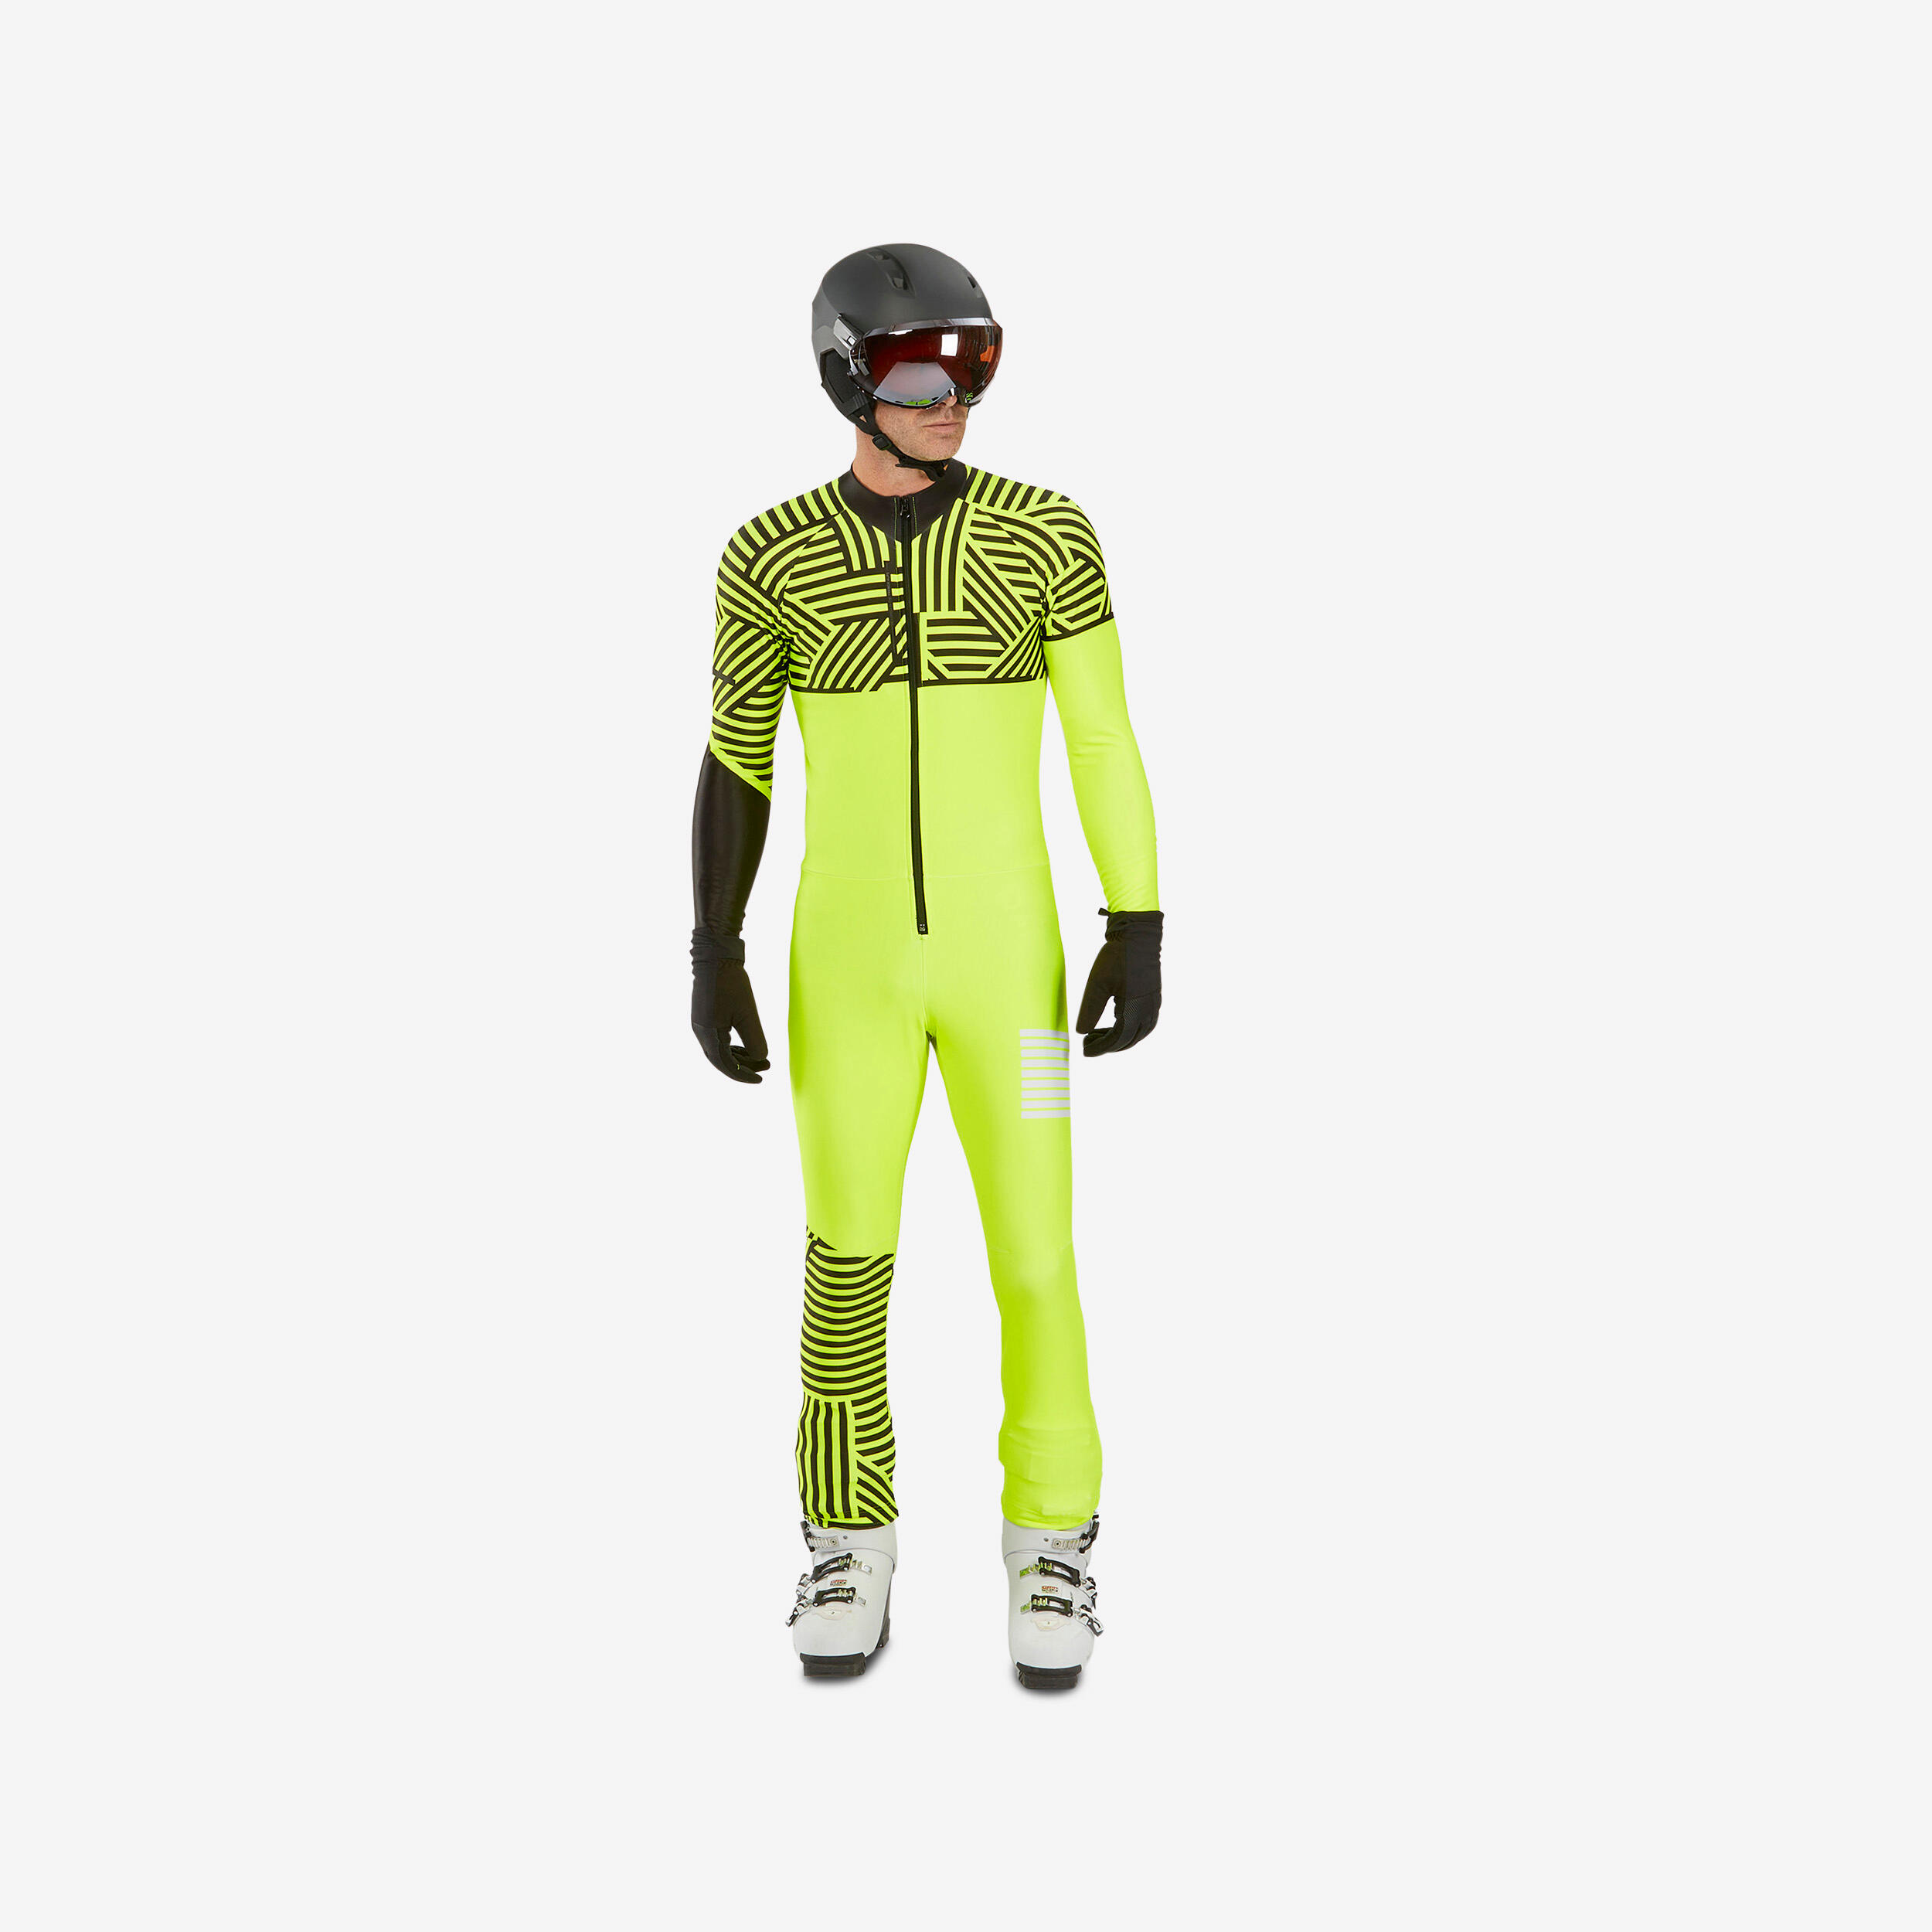 ADULT COMPETITION SKI SUIT 980 - YELLOW 1/7